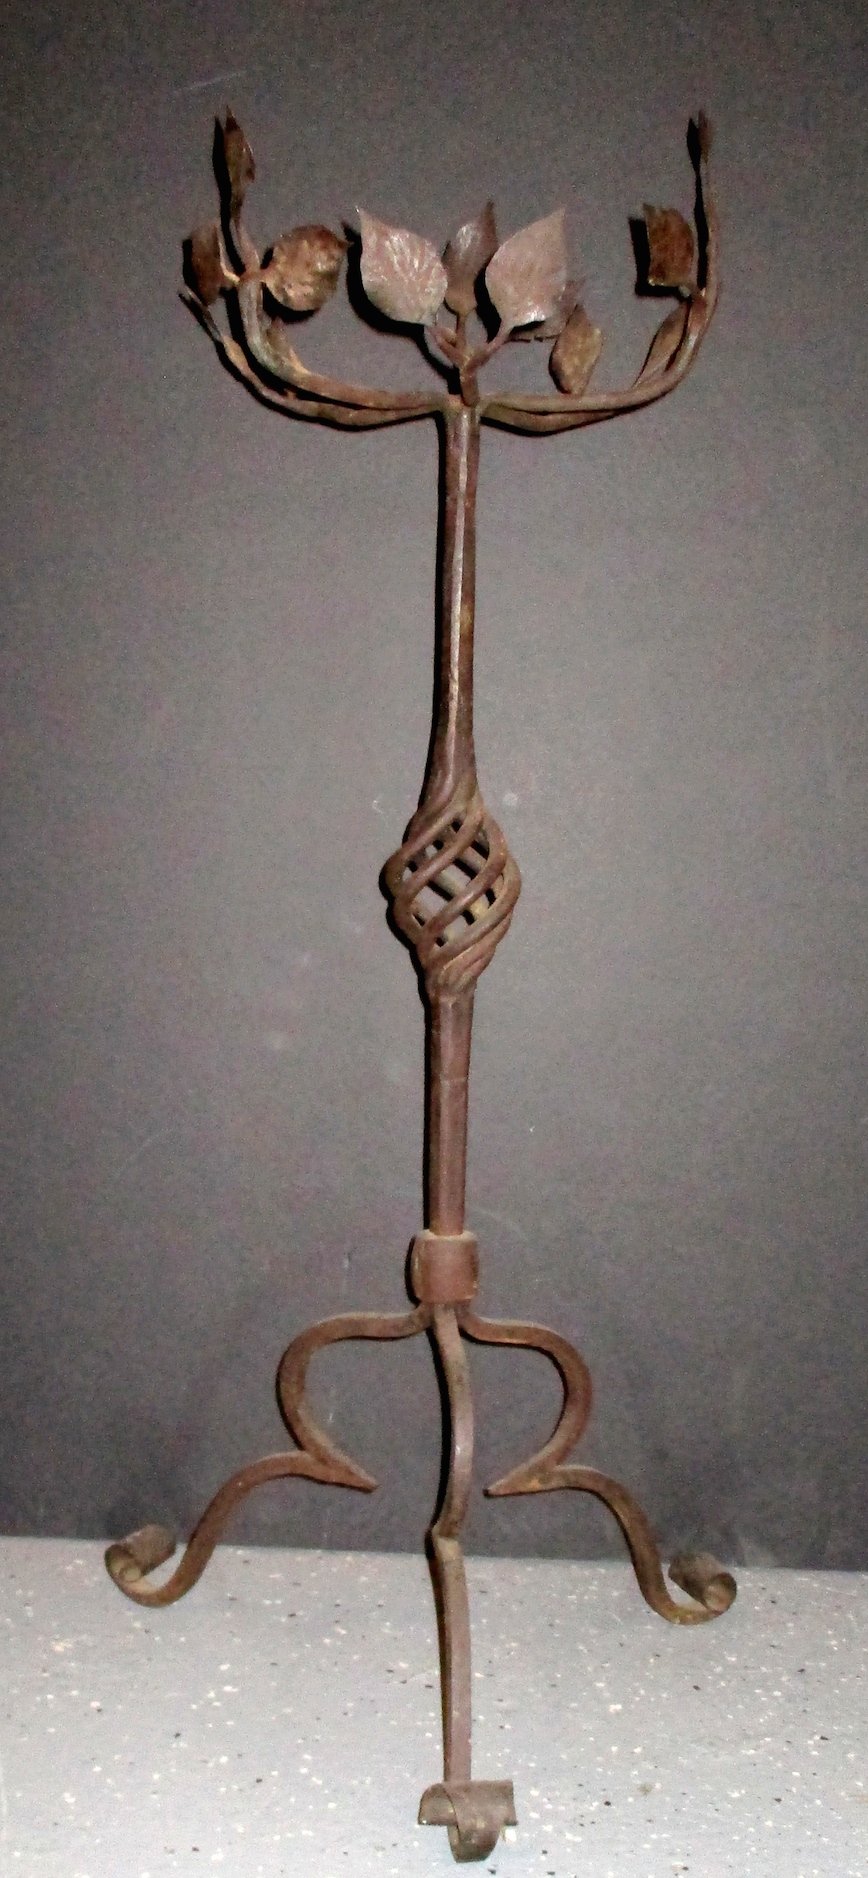 One of a Pair of Hand Forged Iron Plant Stands (12" D Base x 10" D Top x 31" H)